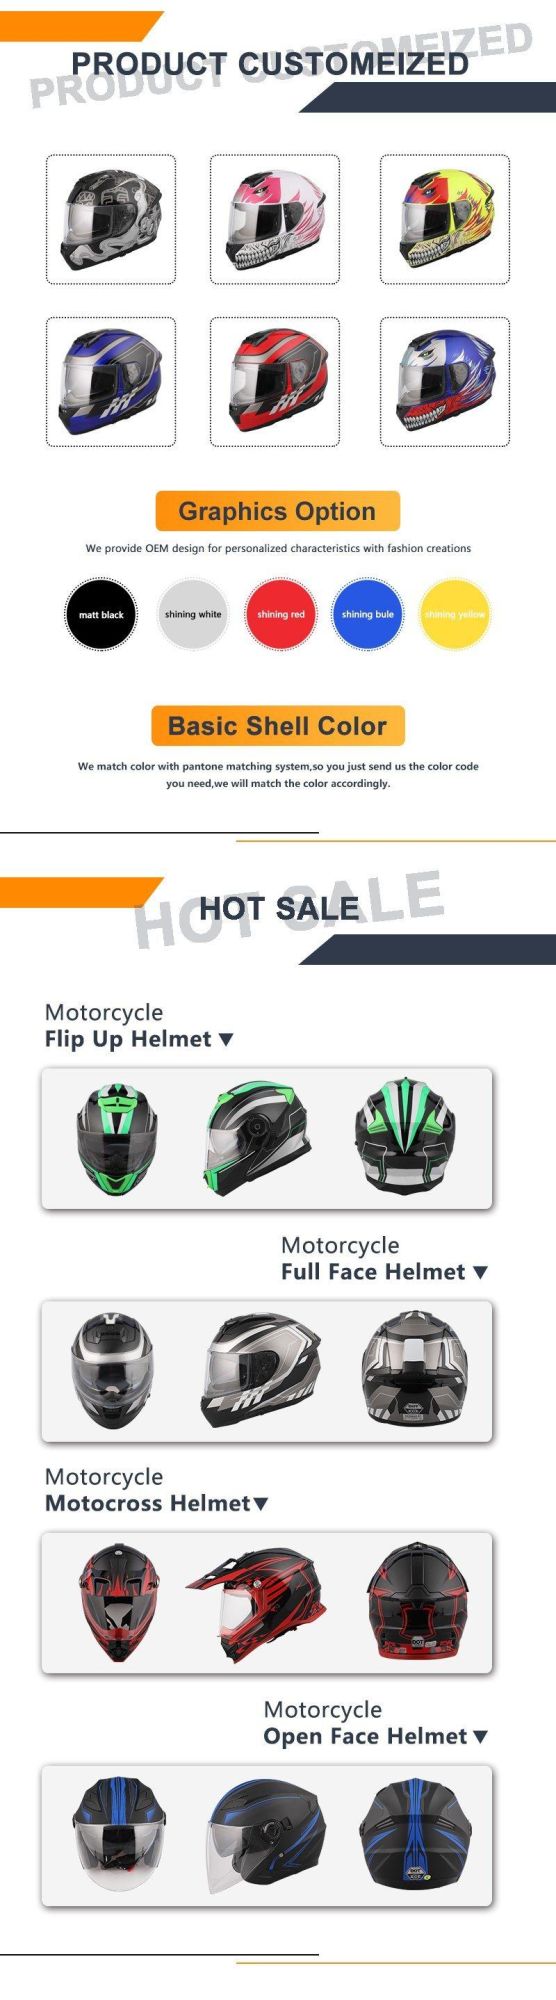 Fashion Best Full Face Motorcycle Helmets with ECE/DOT Double Visor